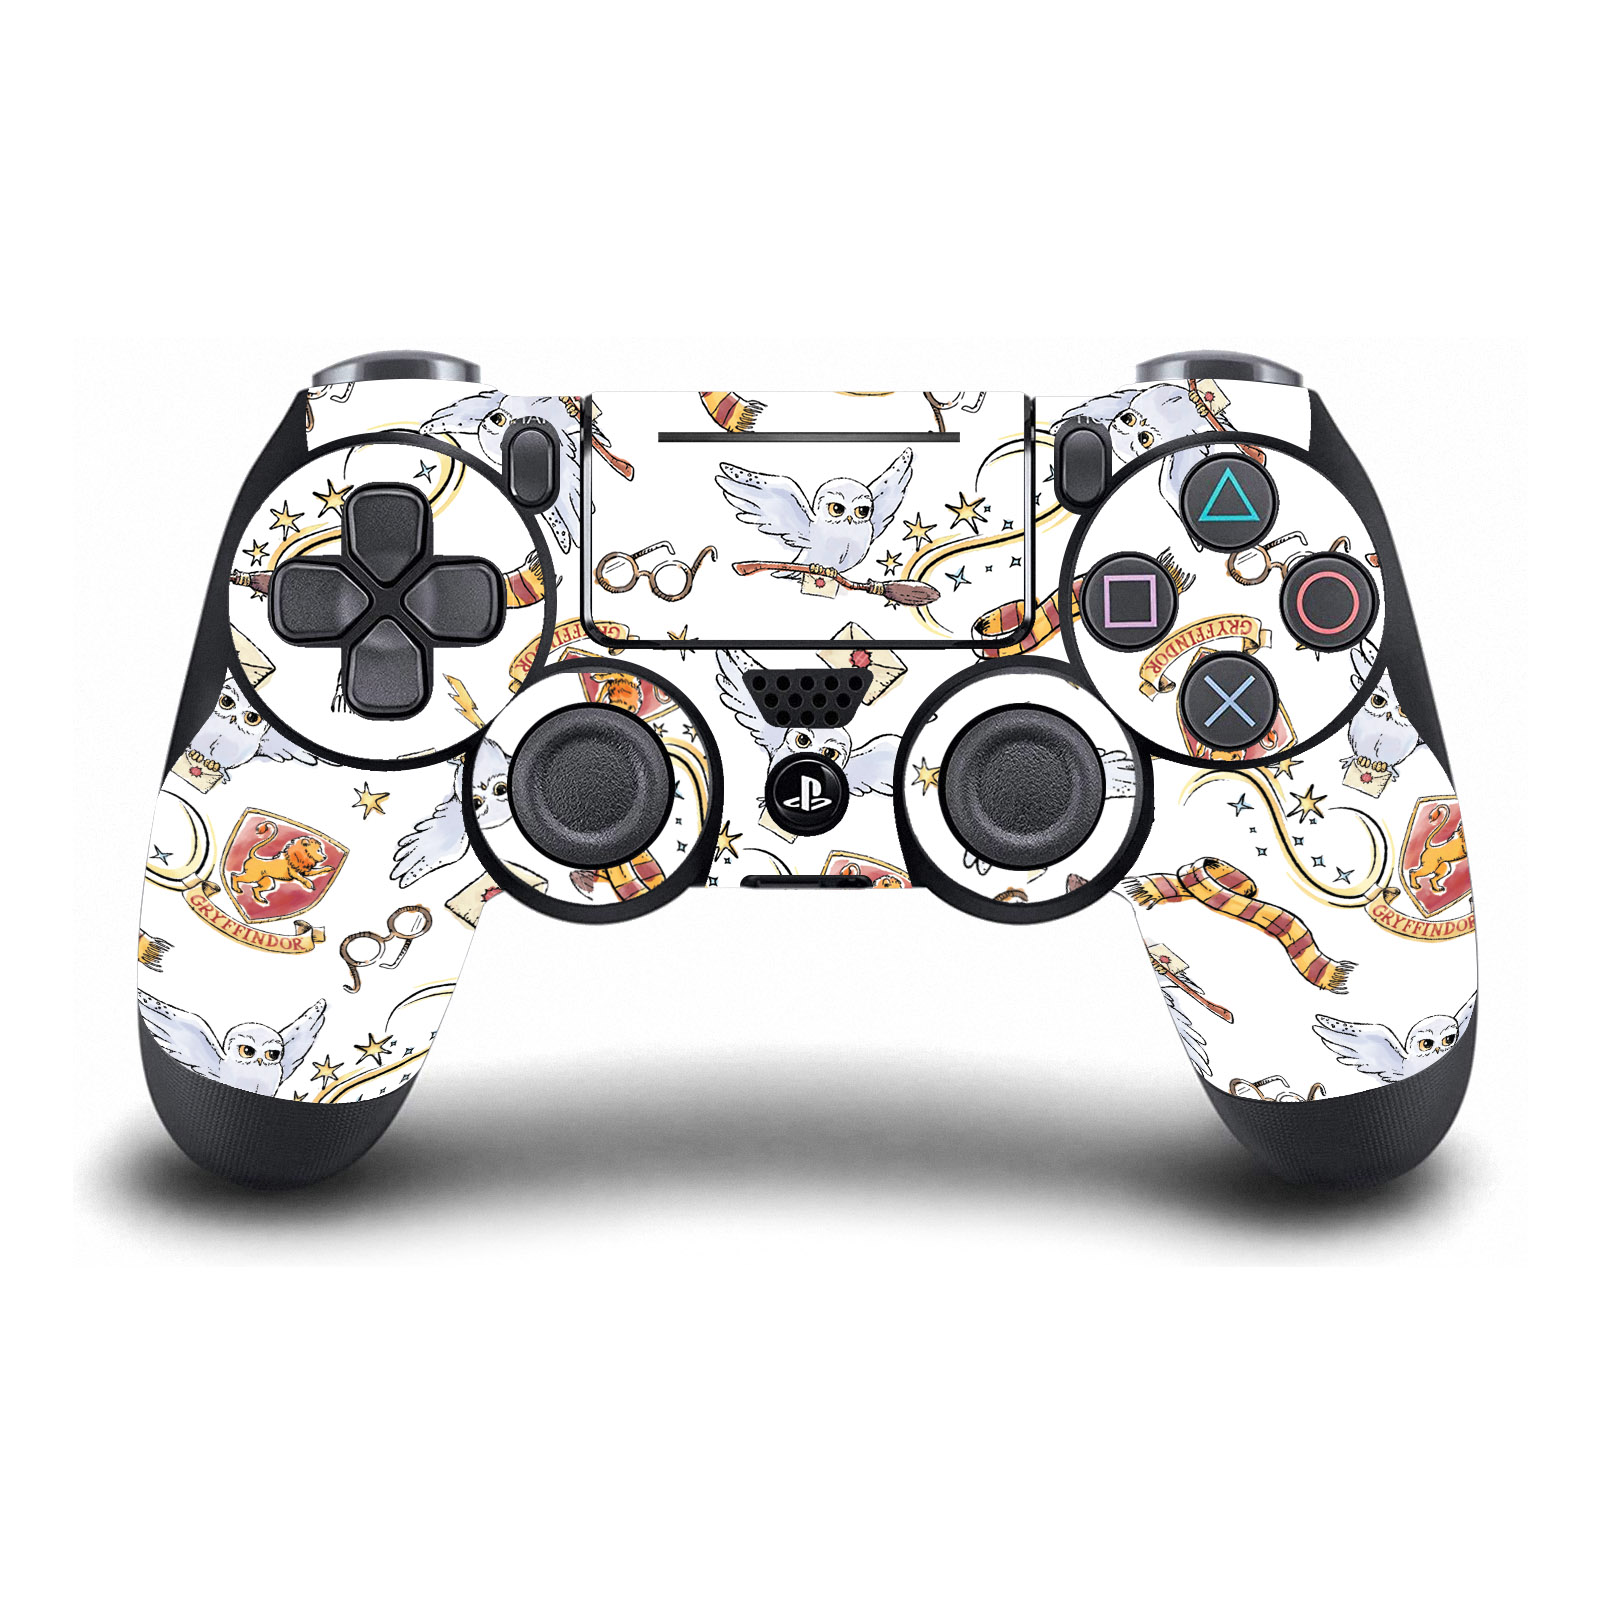 OFFICIAL HARRY POTTER GRAPHICS VINYL SKIN DECAL FOR DUALSHOCK 4 CONTROLLER